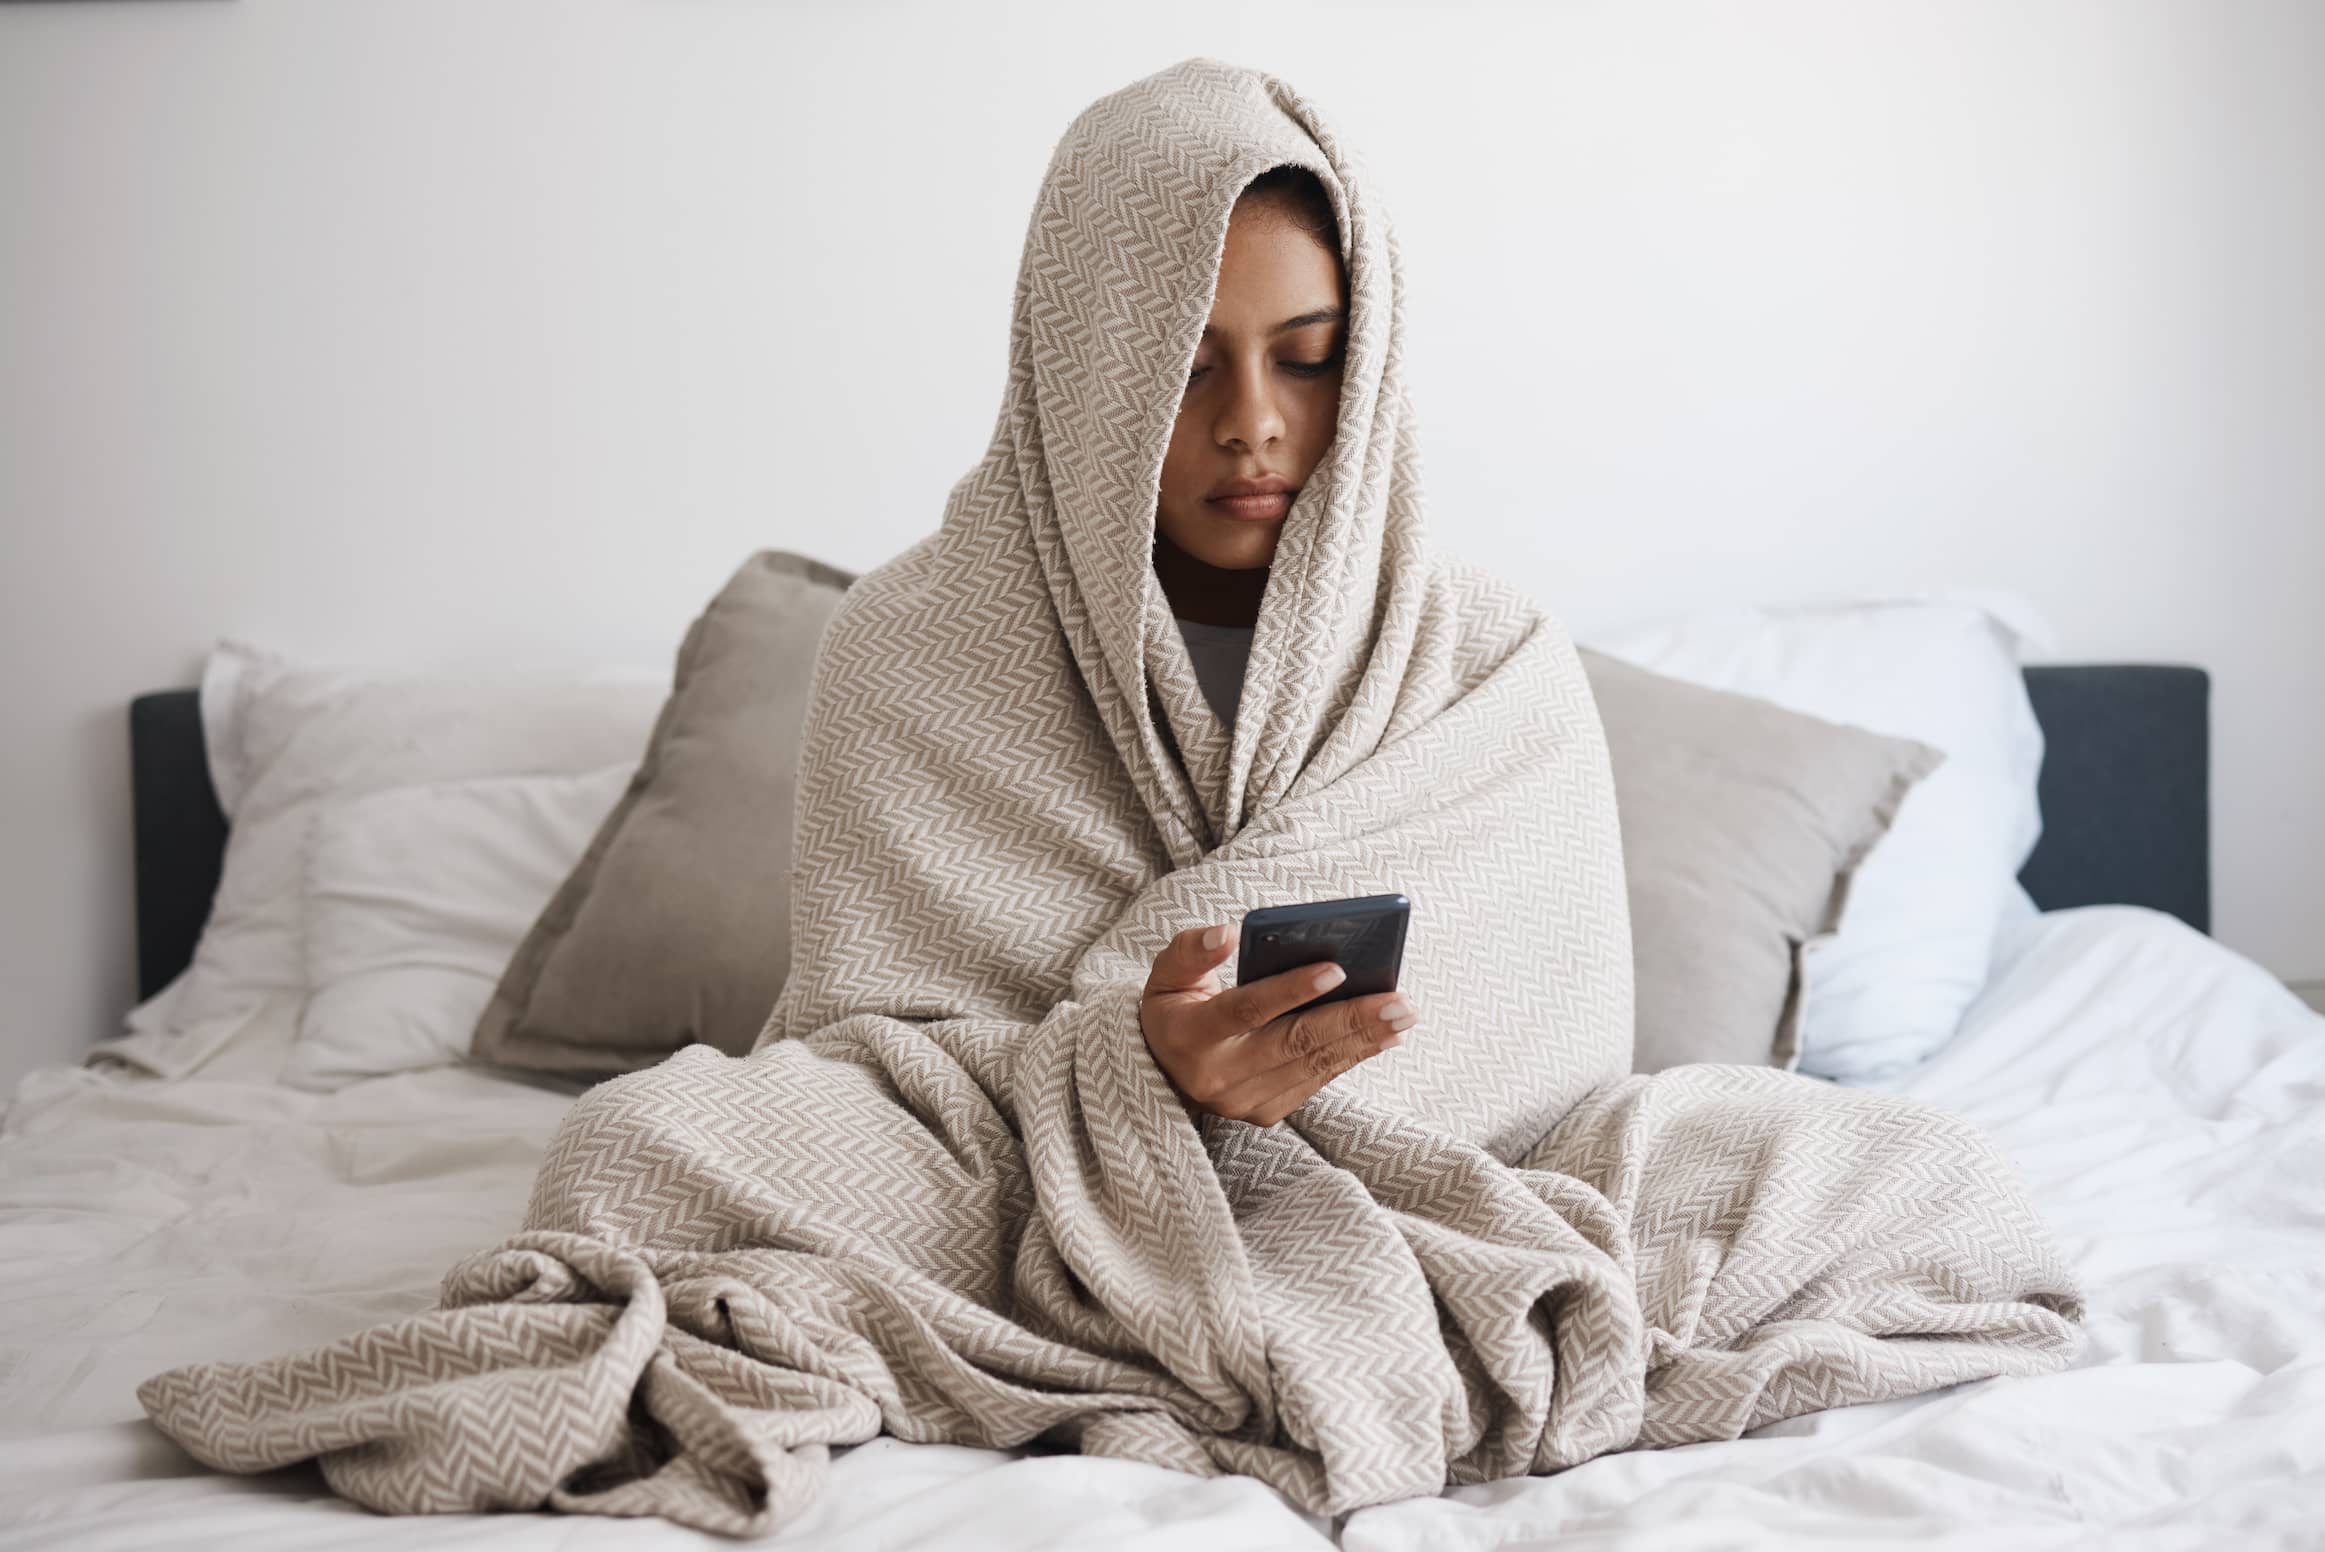 Depressed woman wrapped in blanket sitting on her bed.